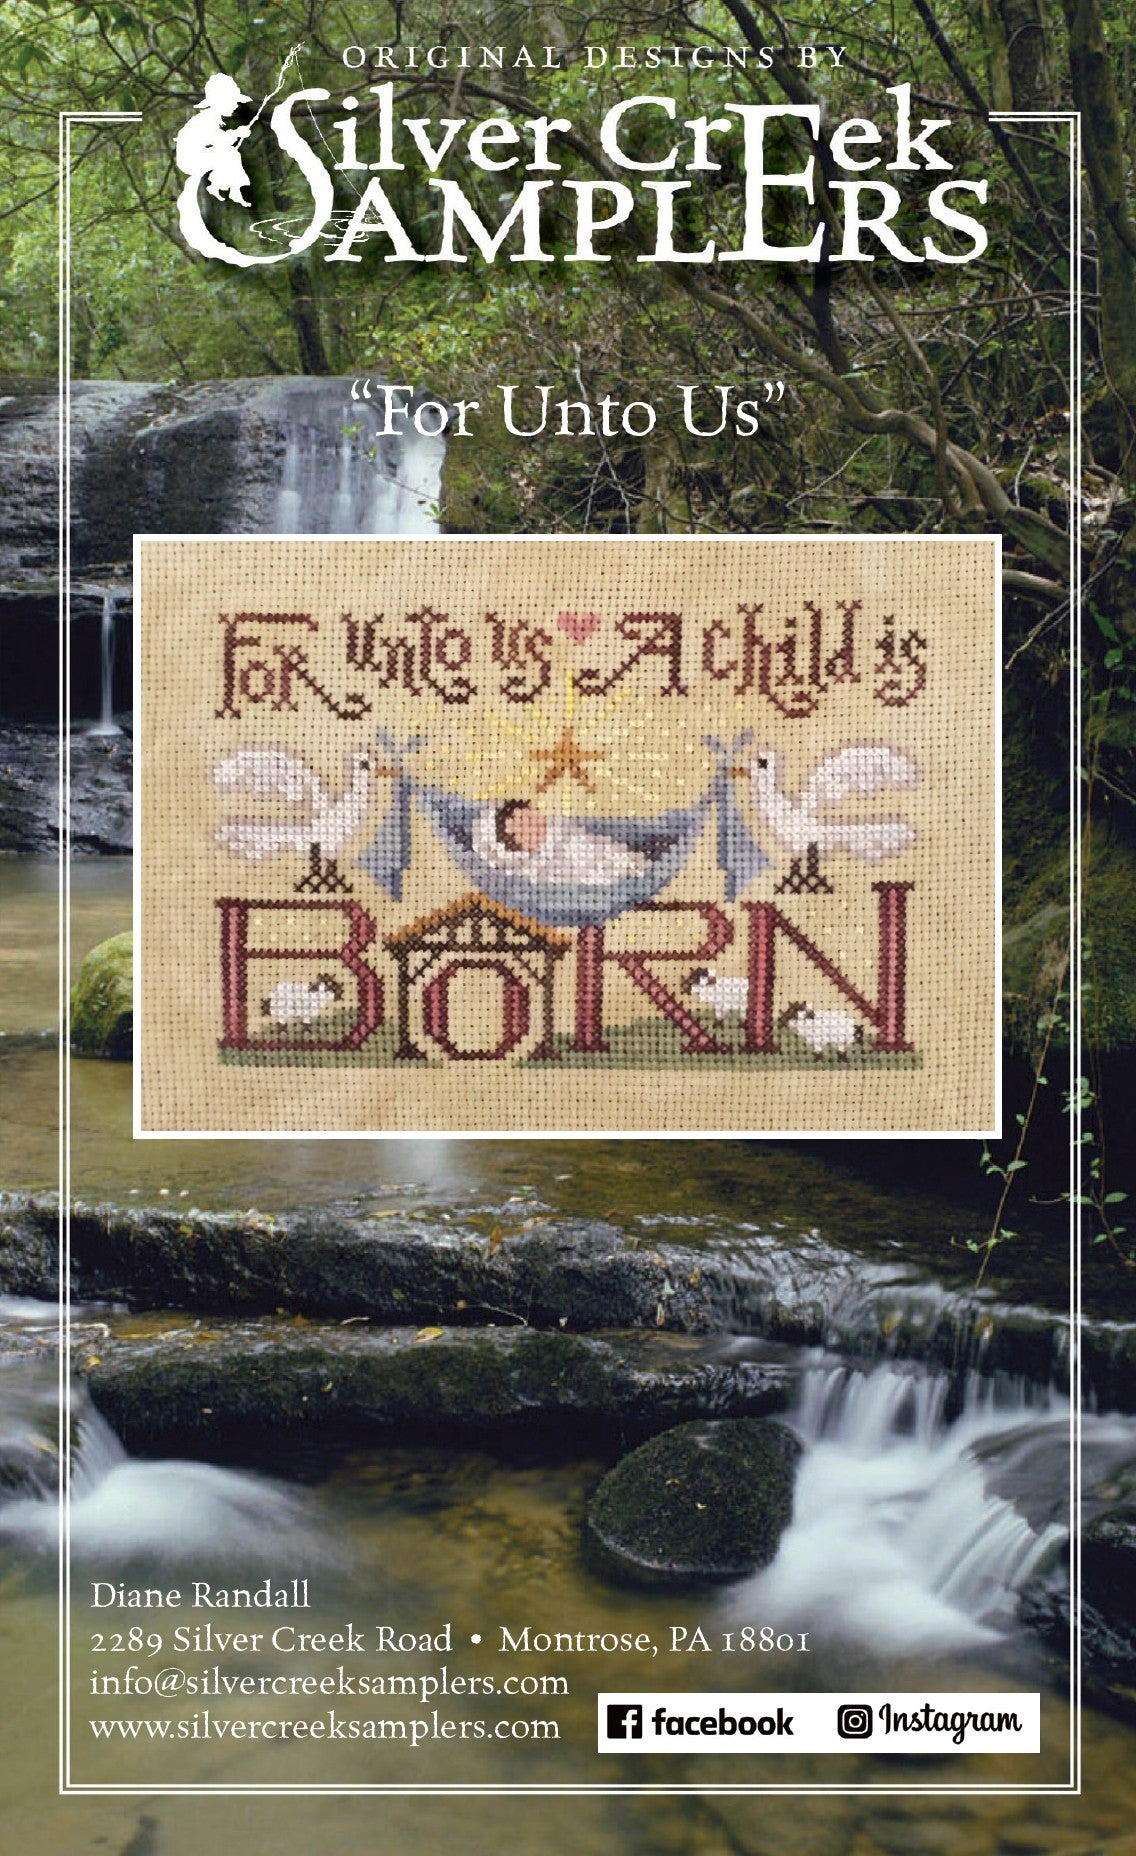 For Unto Us by Silver Creek Samplers Silver Creek Samplers